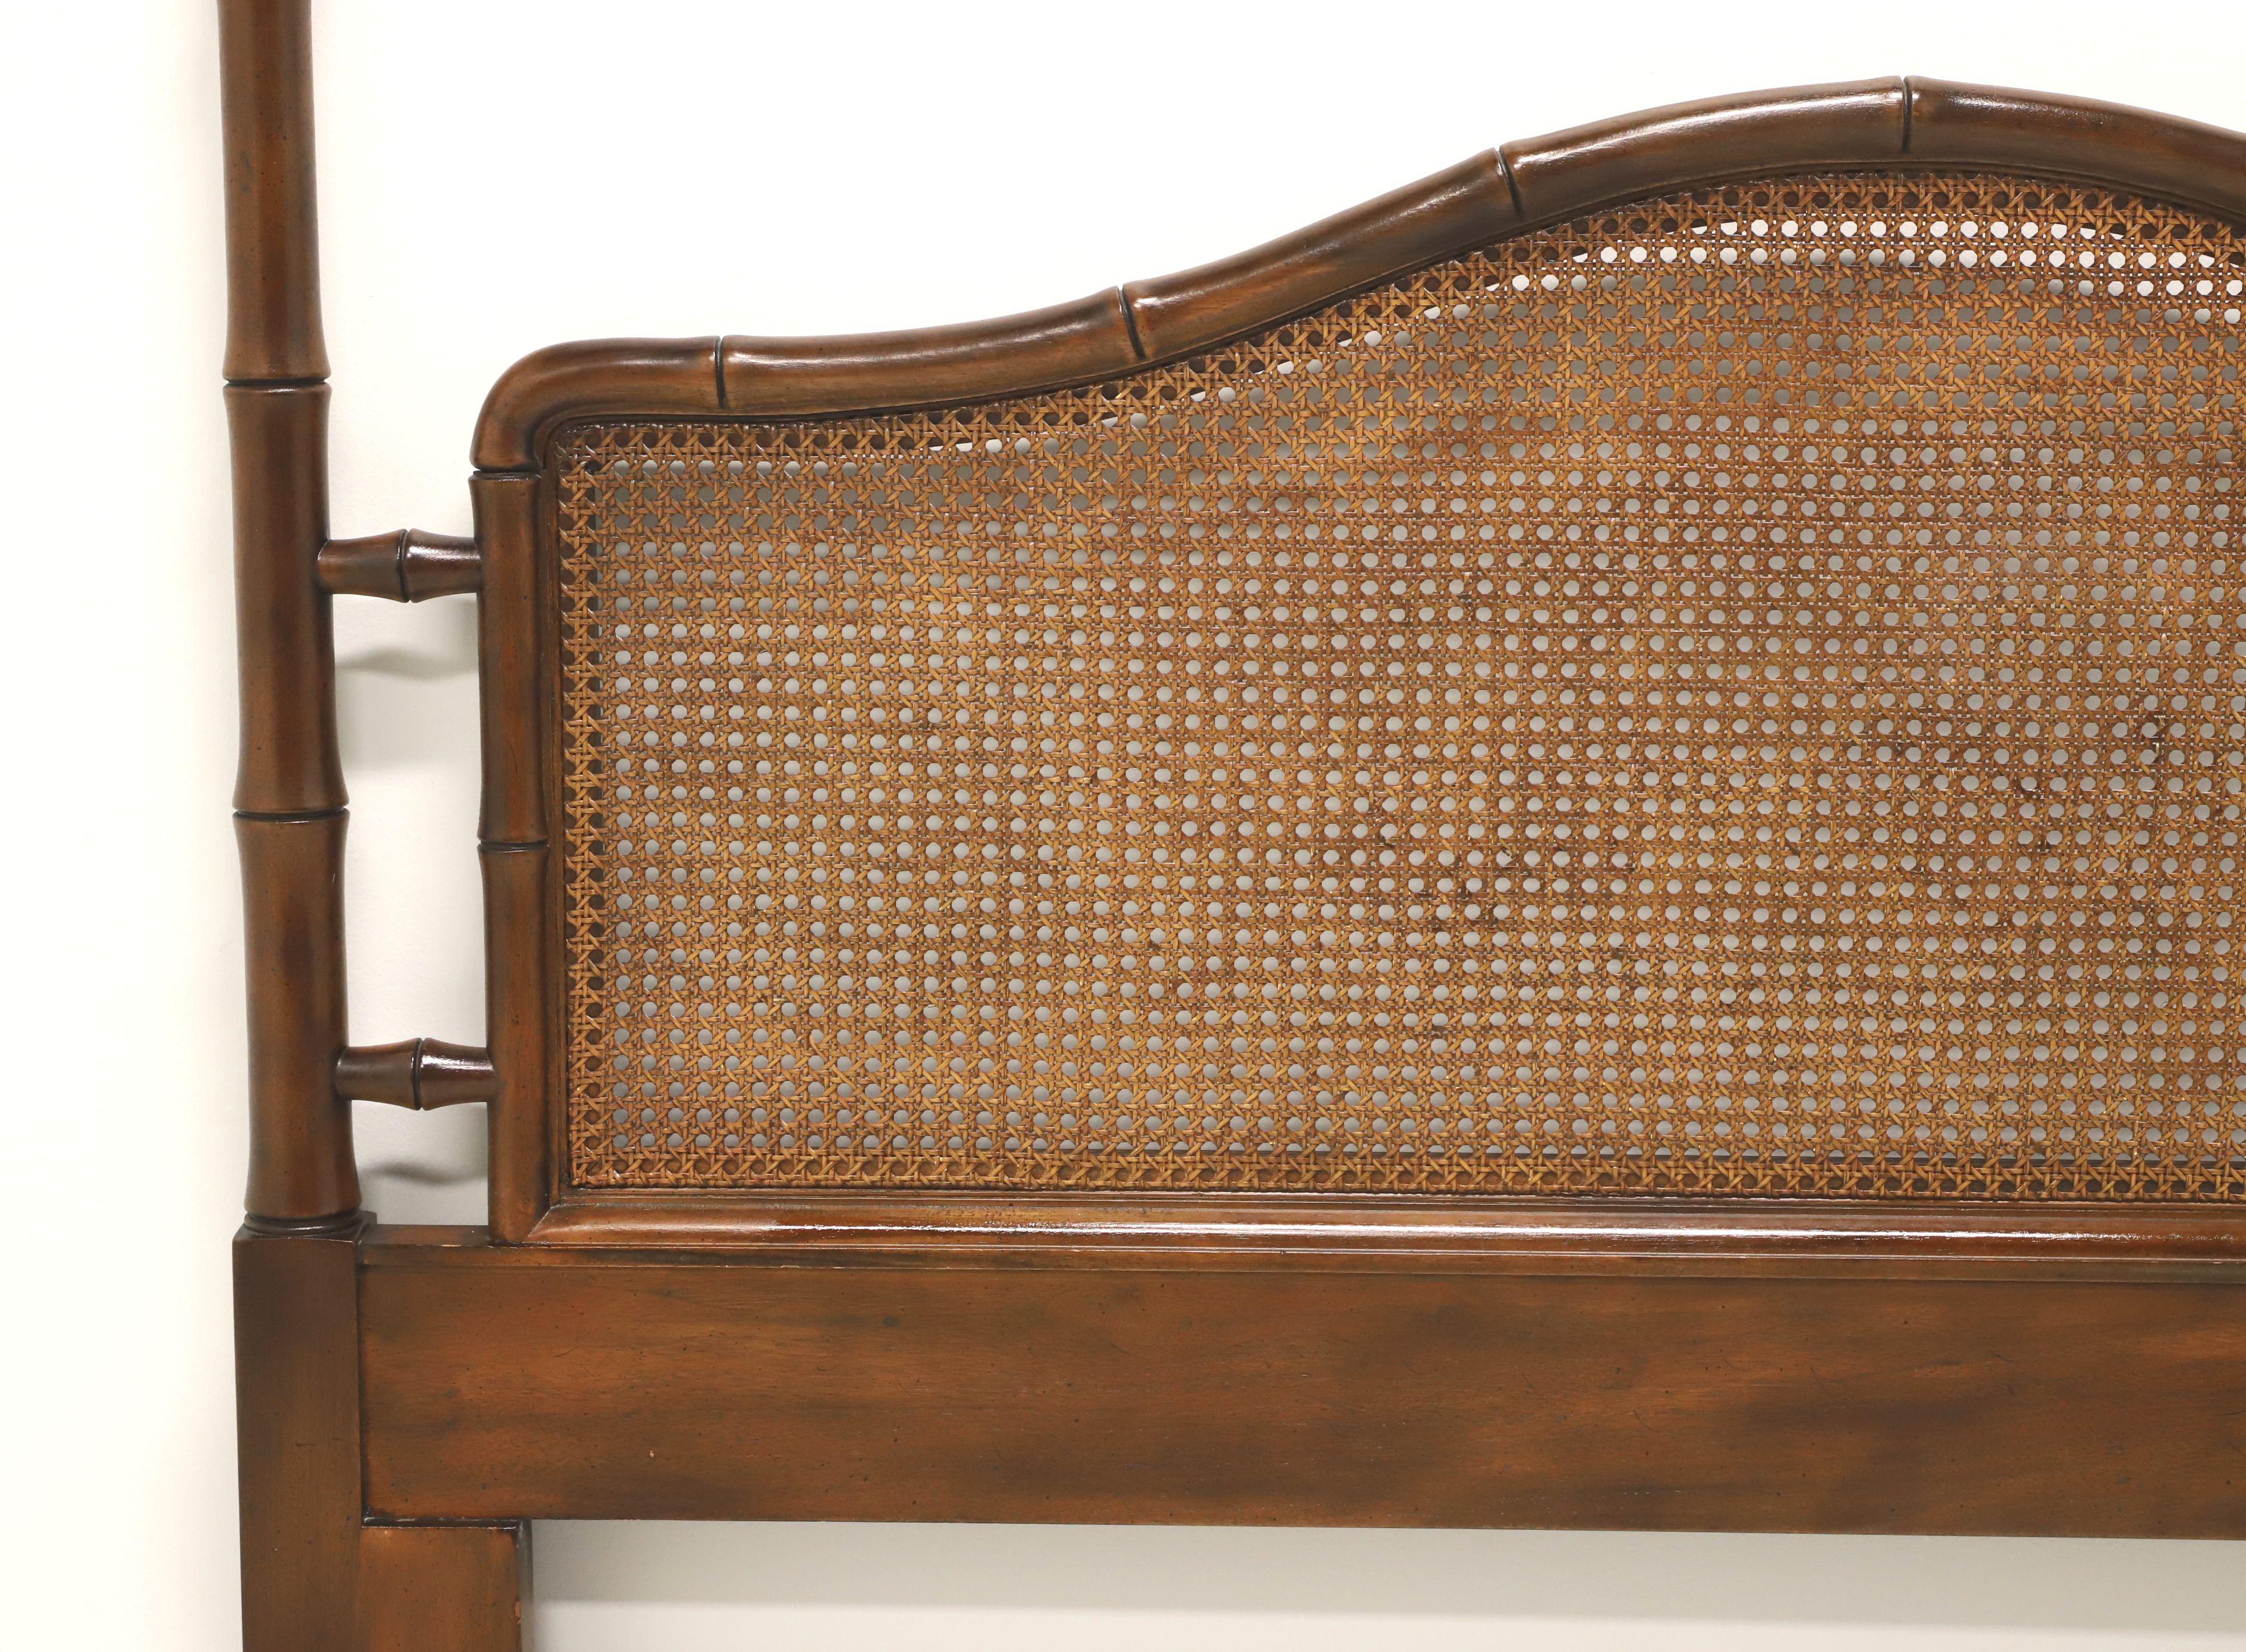 An Asian Chinoiserie style queen size headboard by Henredon. Mahogany with faux bamboo styling, two posts with finials and a center panel inset with cane on a solid base. Made in North Carolina, USA, in the late 20th Century. 

Measures:  60w 2.5d,